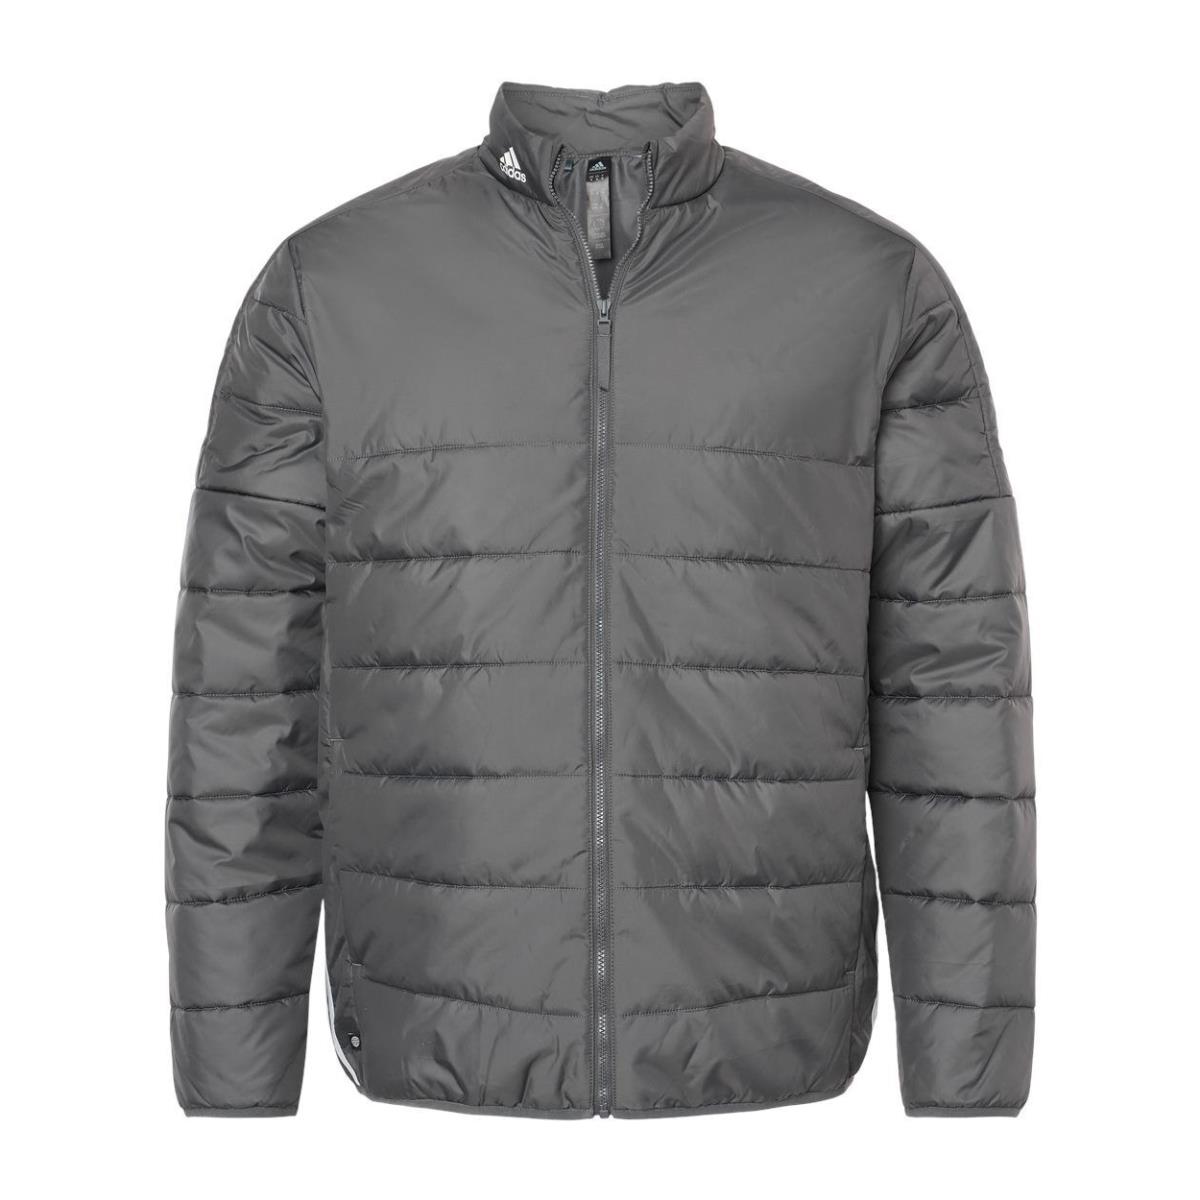 Adidas Men`s S-4XL 3-Stripes Puffer Jacket or Vest Full-zip Insulated Coat Grey / White